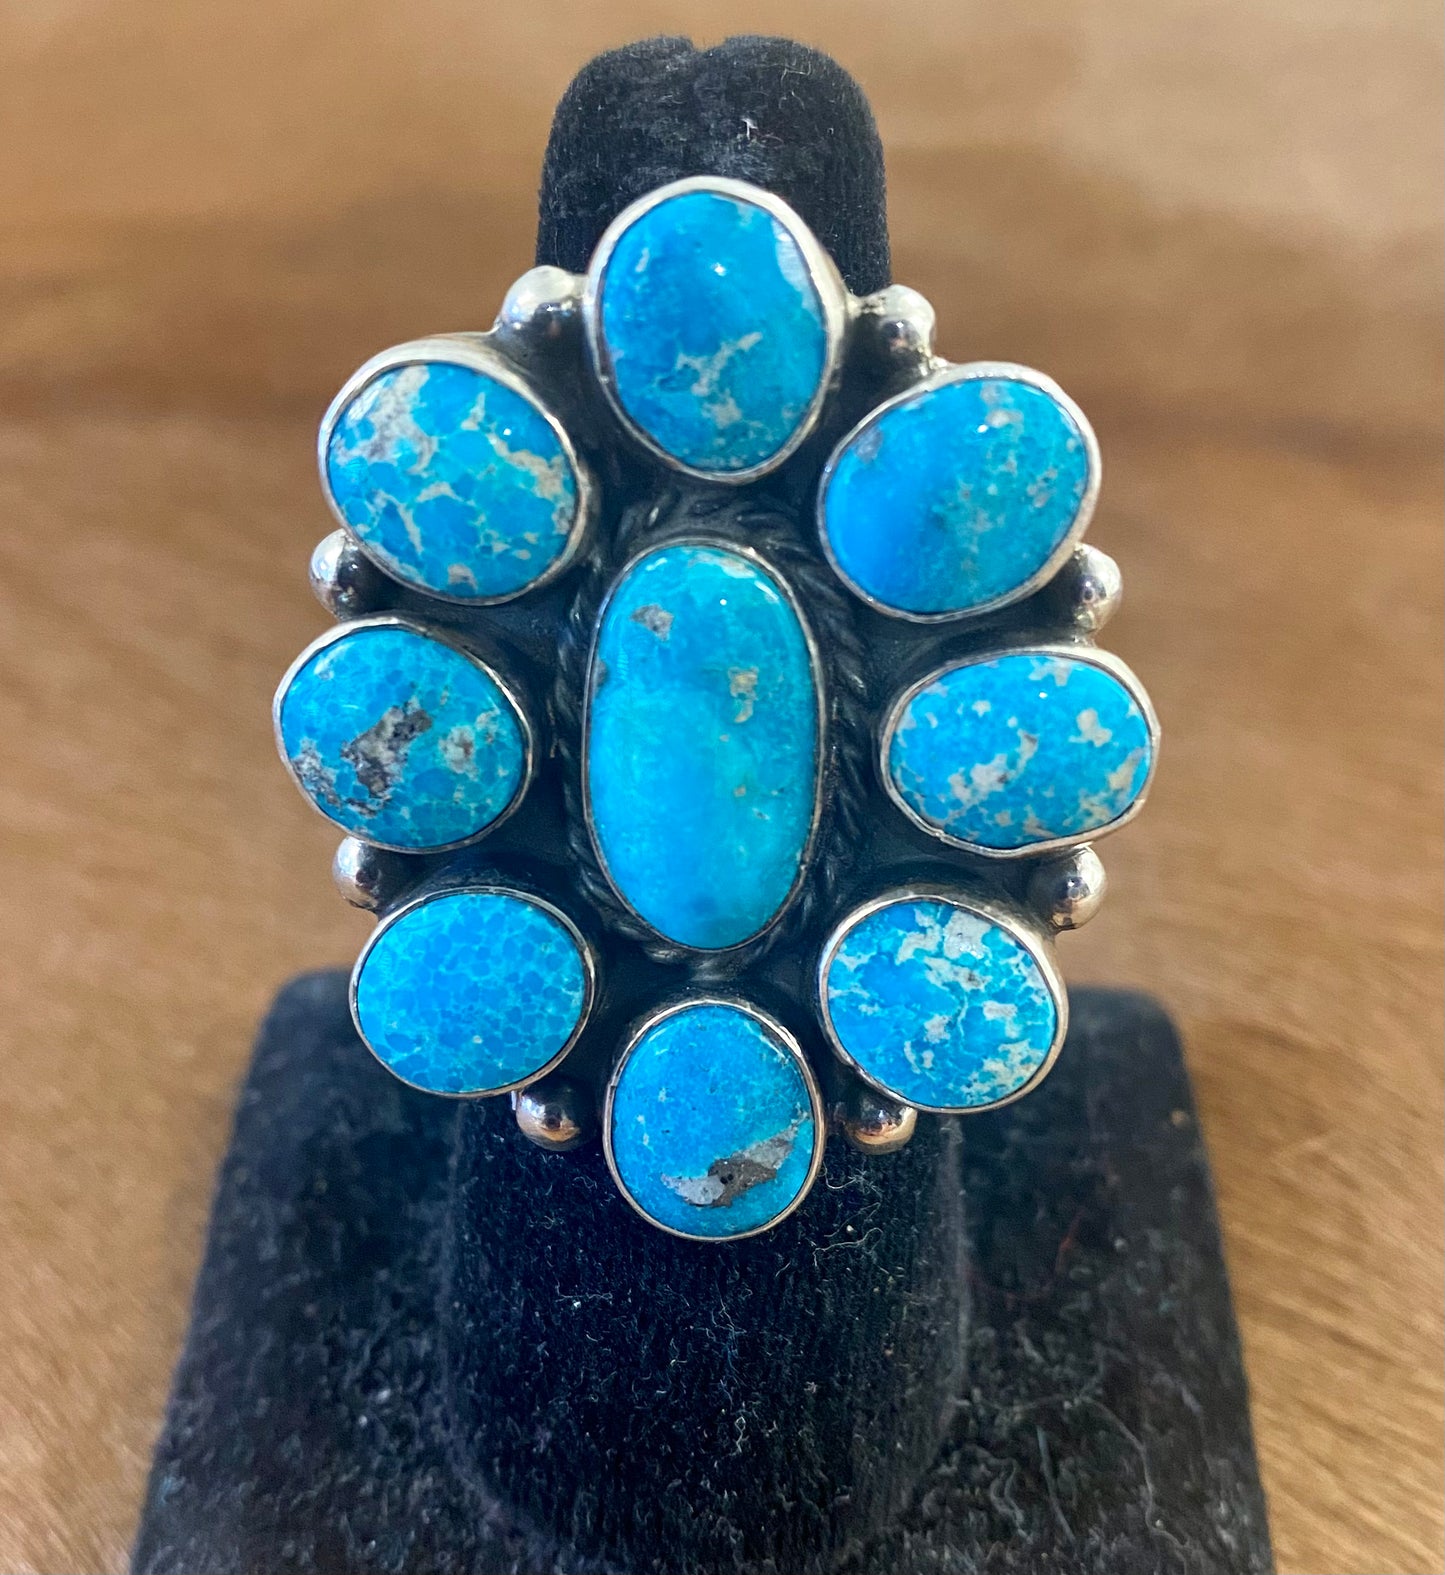 Gorgeous adjustable Kingman turquoise large cluster sterling silver ring. Nine unique turquoise stones grouped together. Stamped sterling and signed "AG" inside of a clover by Native American artist silversmith duo Arnold & Carleena Goodluck. Beautiful native made piece of art to add to your jewelry collection!    Size: 1.5” inch length   Signed: YES "AG"  Hallmark/Artist: Arnold & Carleena Goodluck   Stone: Kingman Turquoise 